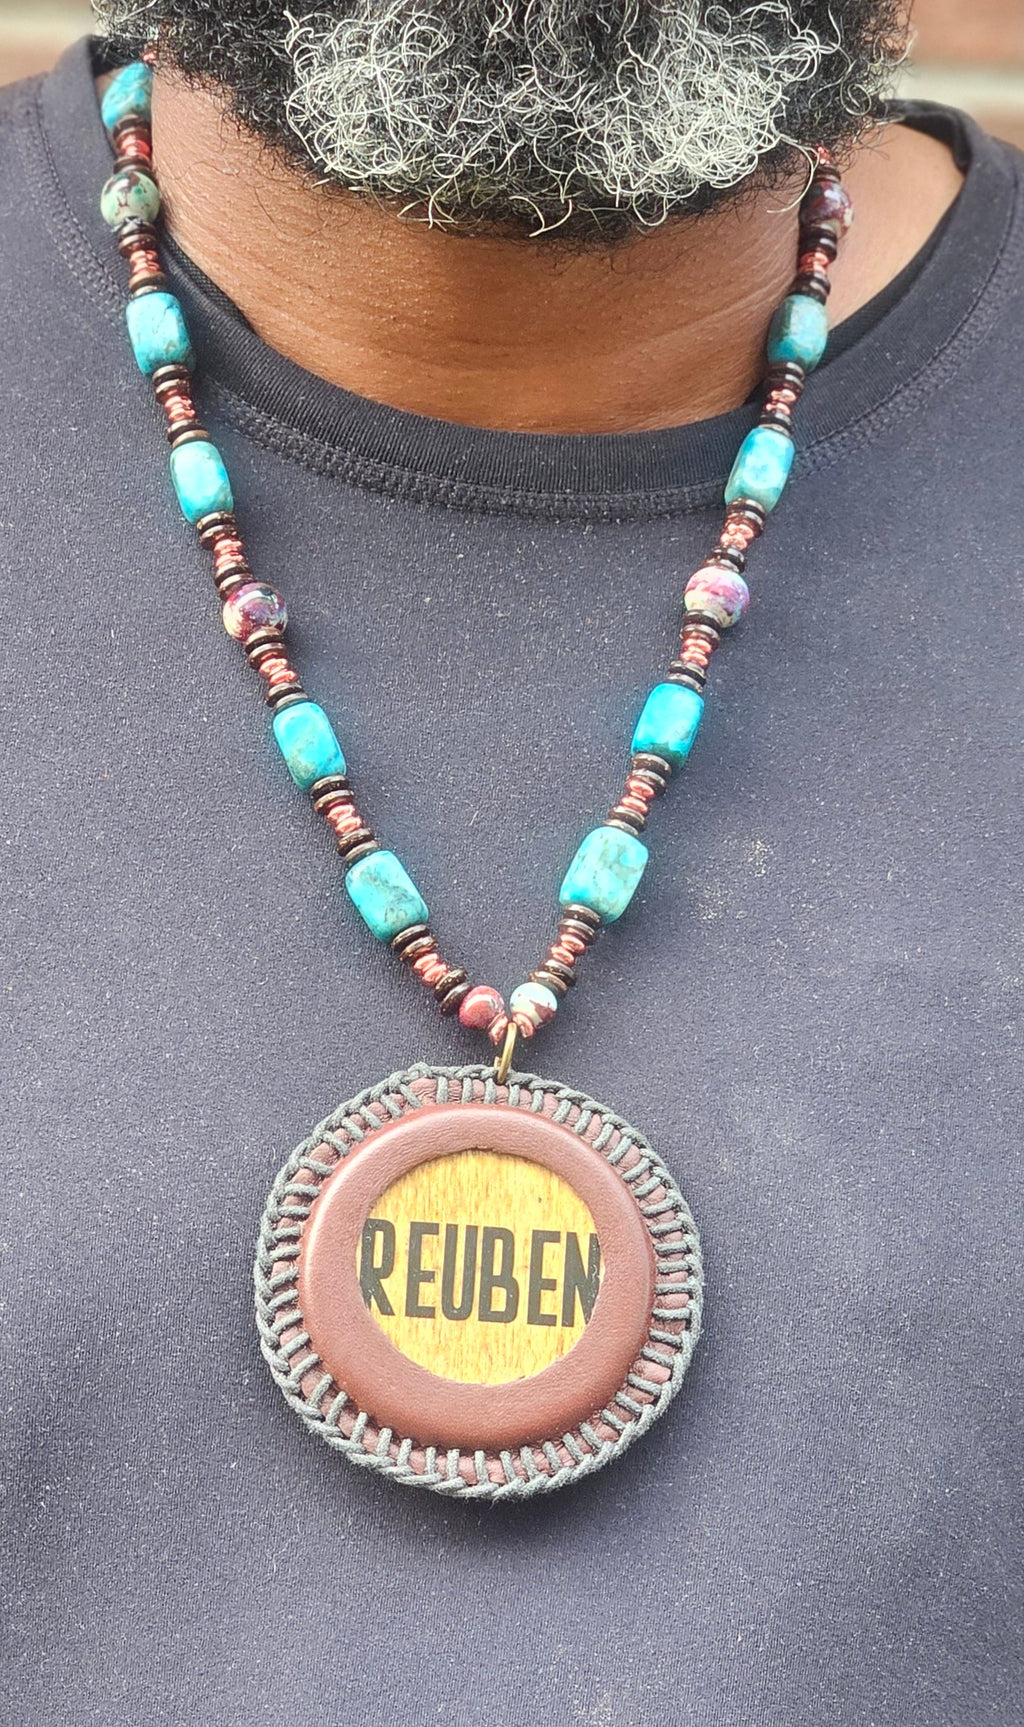 Leather Wrapped Reuben Necklace